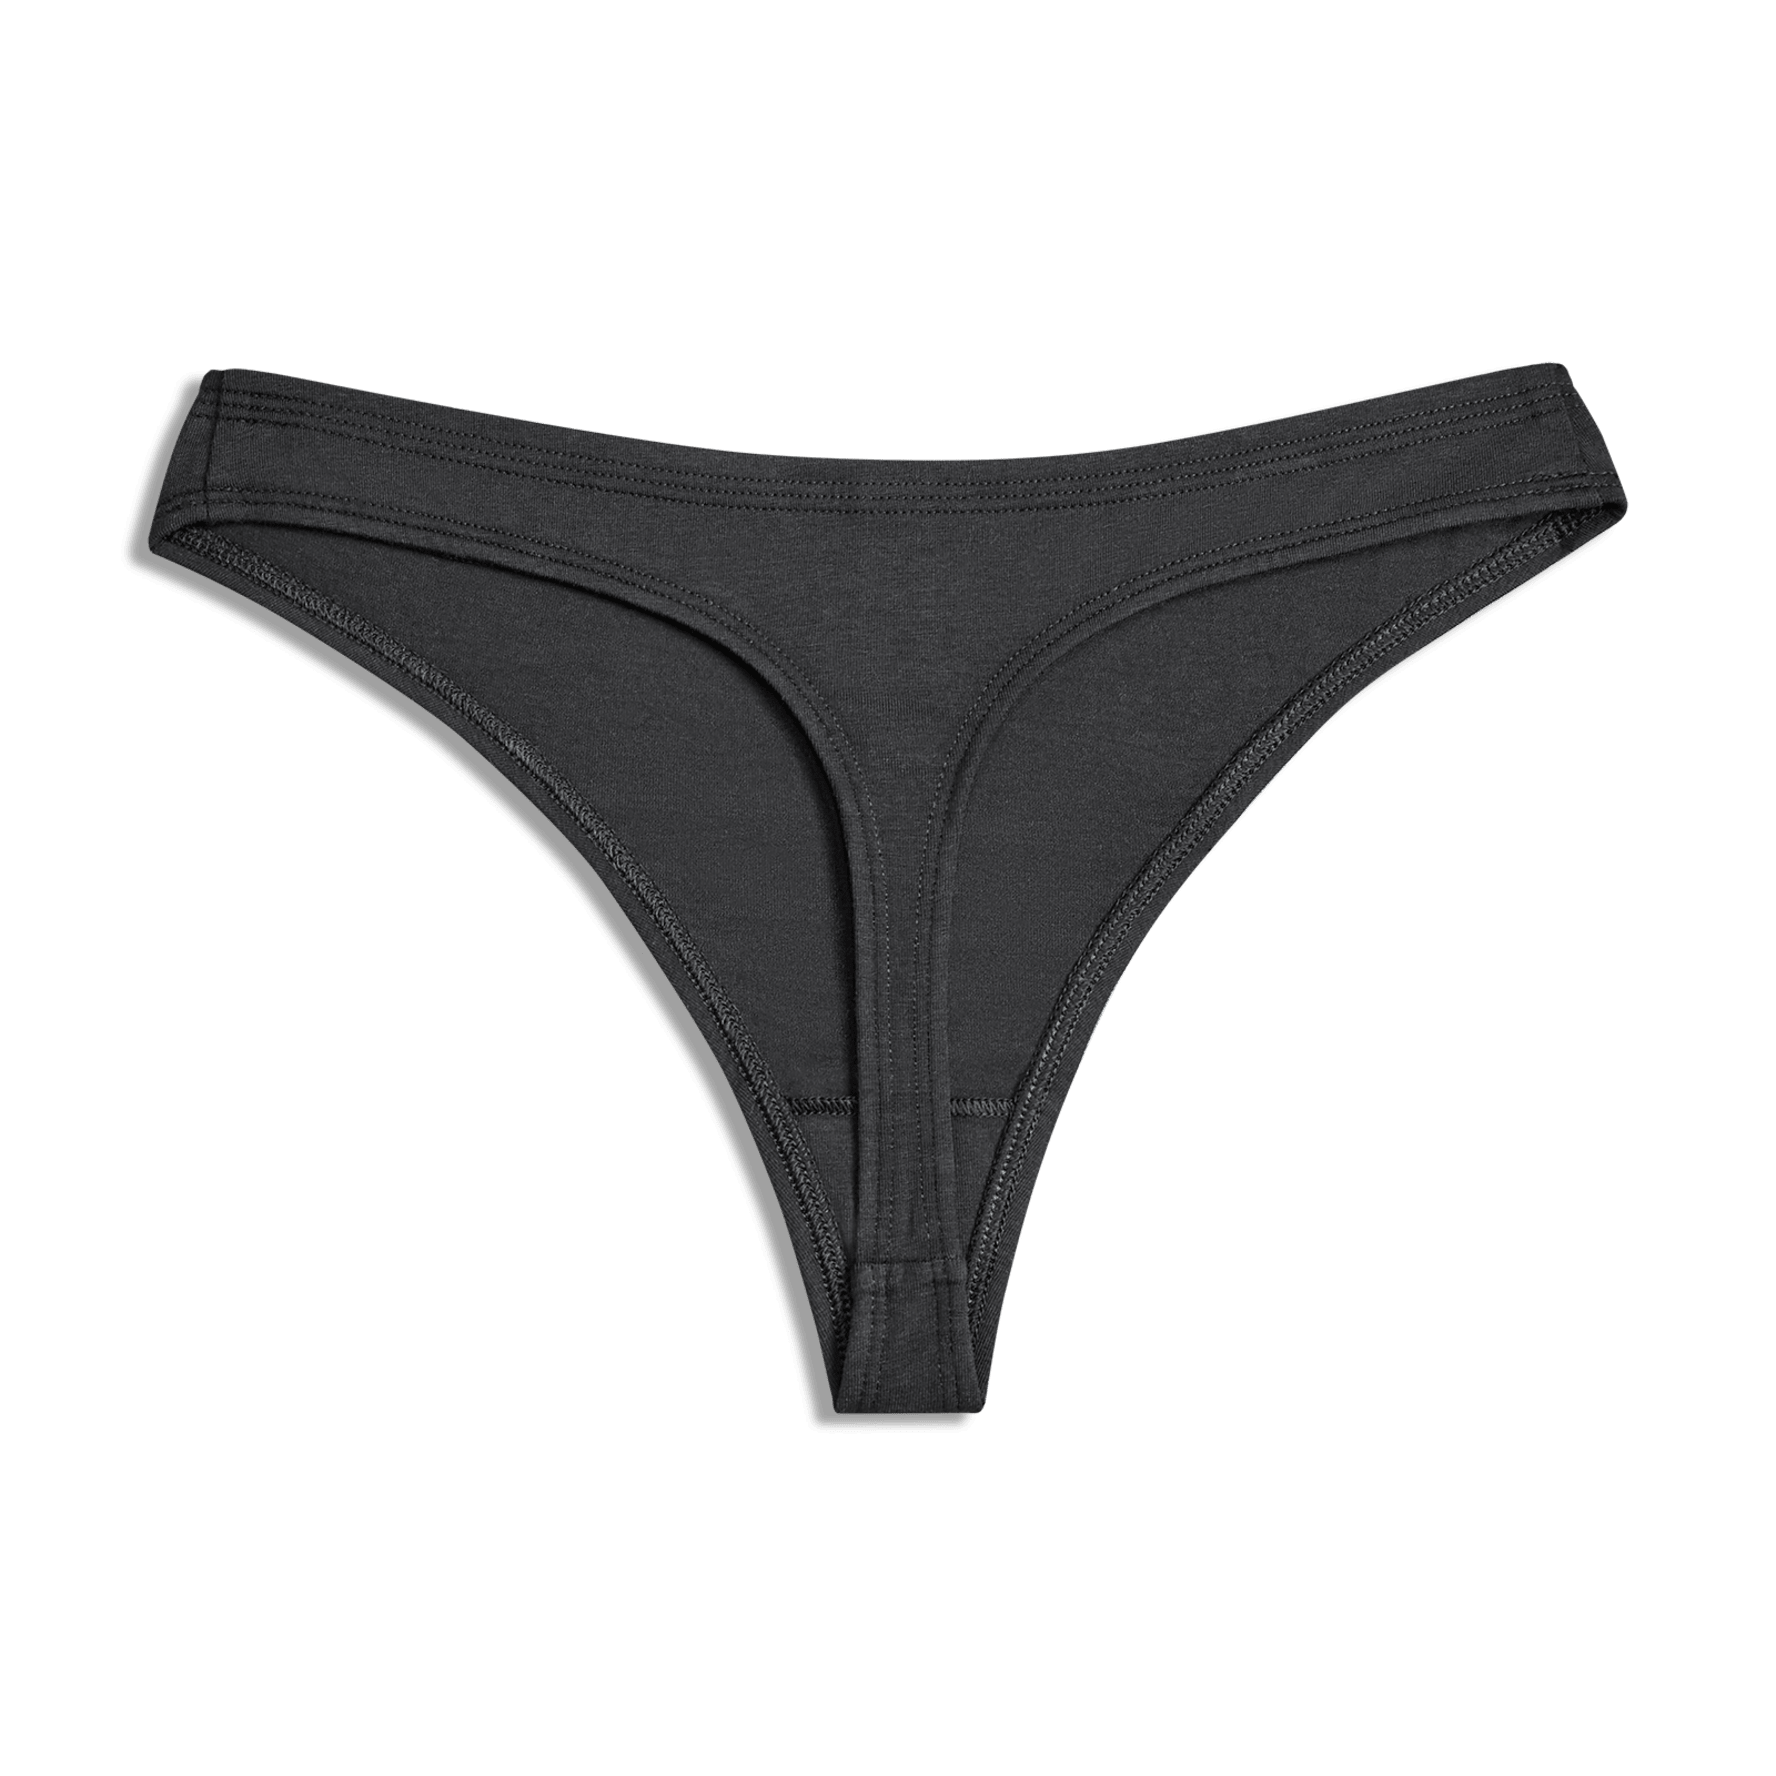 Kindly Yours Women's Sustainable Cotton Thong Underwear, 3-Pack